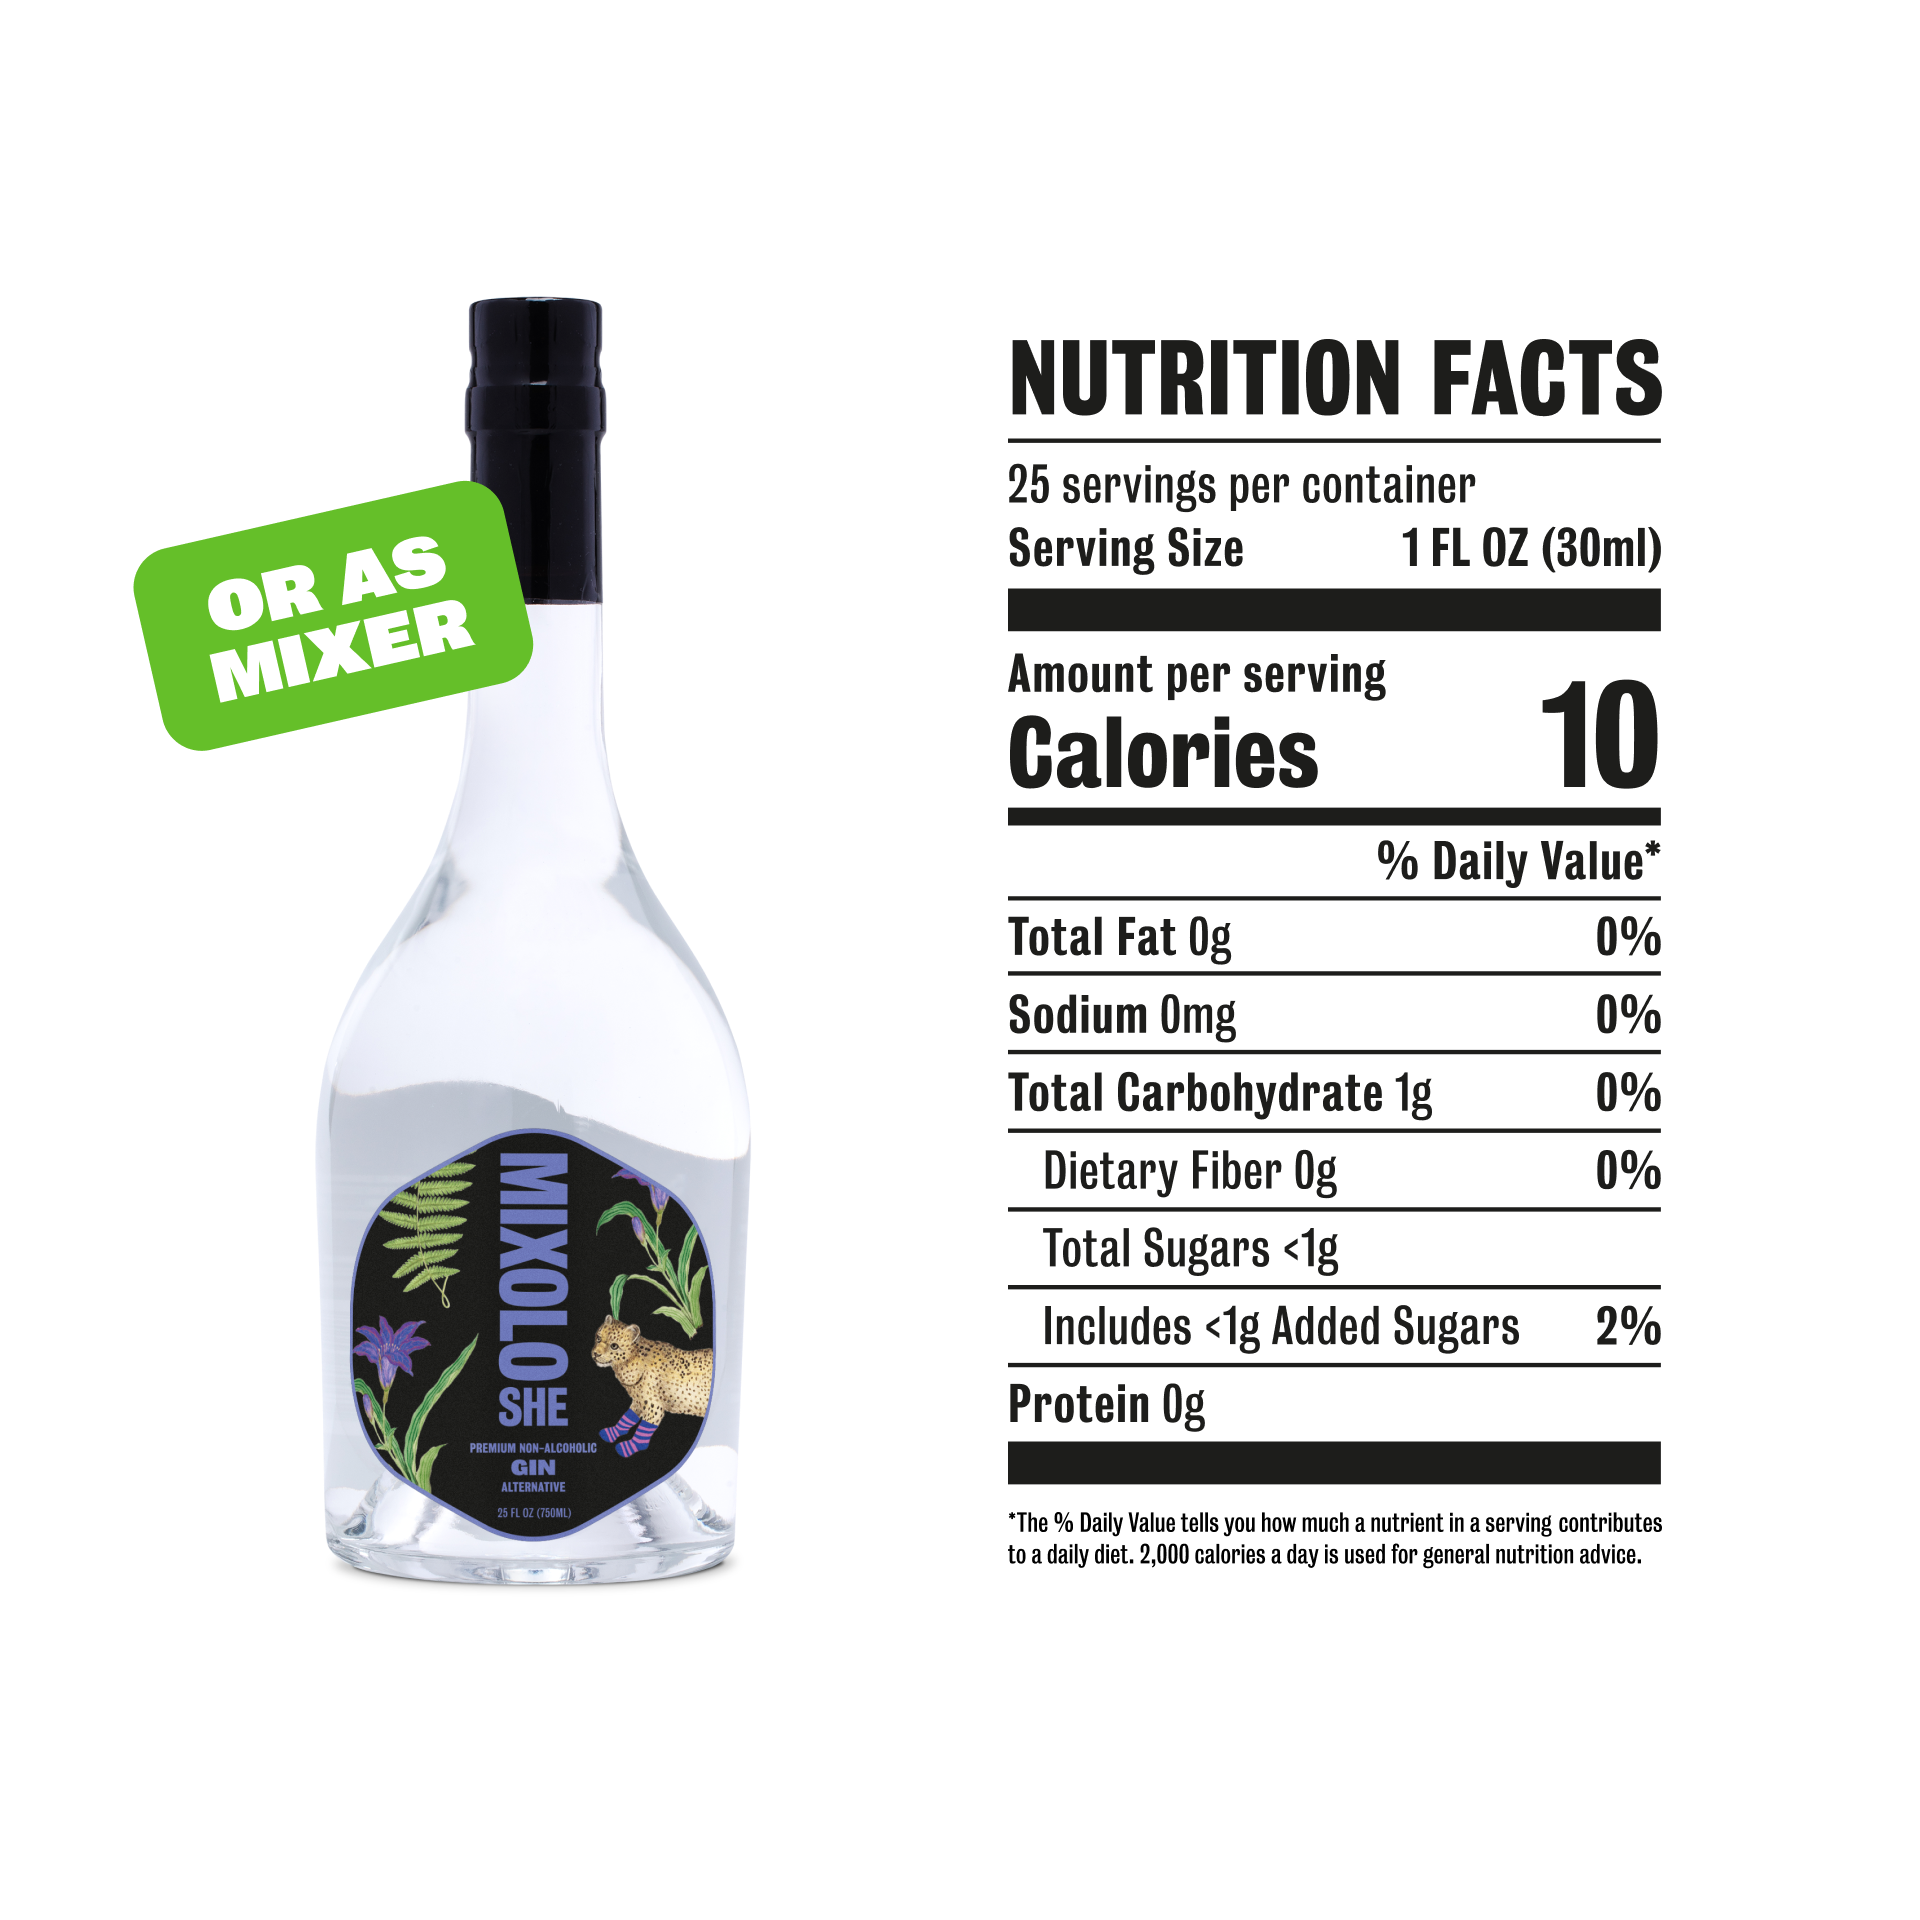 Mixoloshe Premium Non-Alcoholic Gin Nutrition Facts - only 10 Calories per 1 fl oz serving